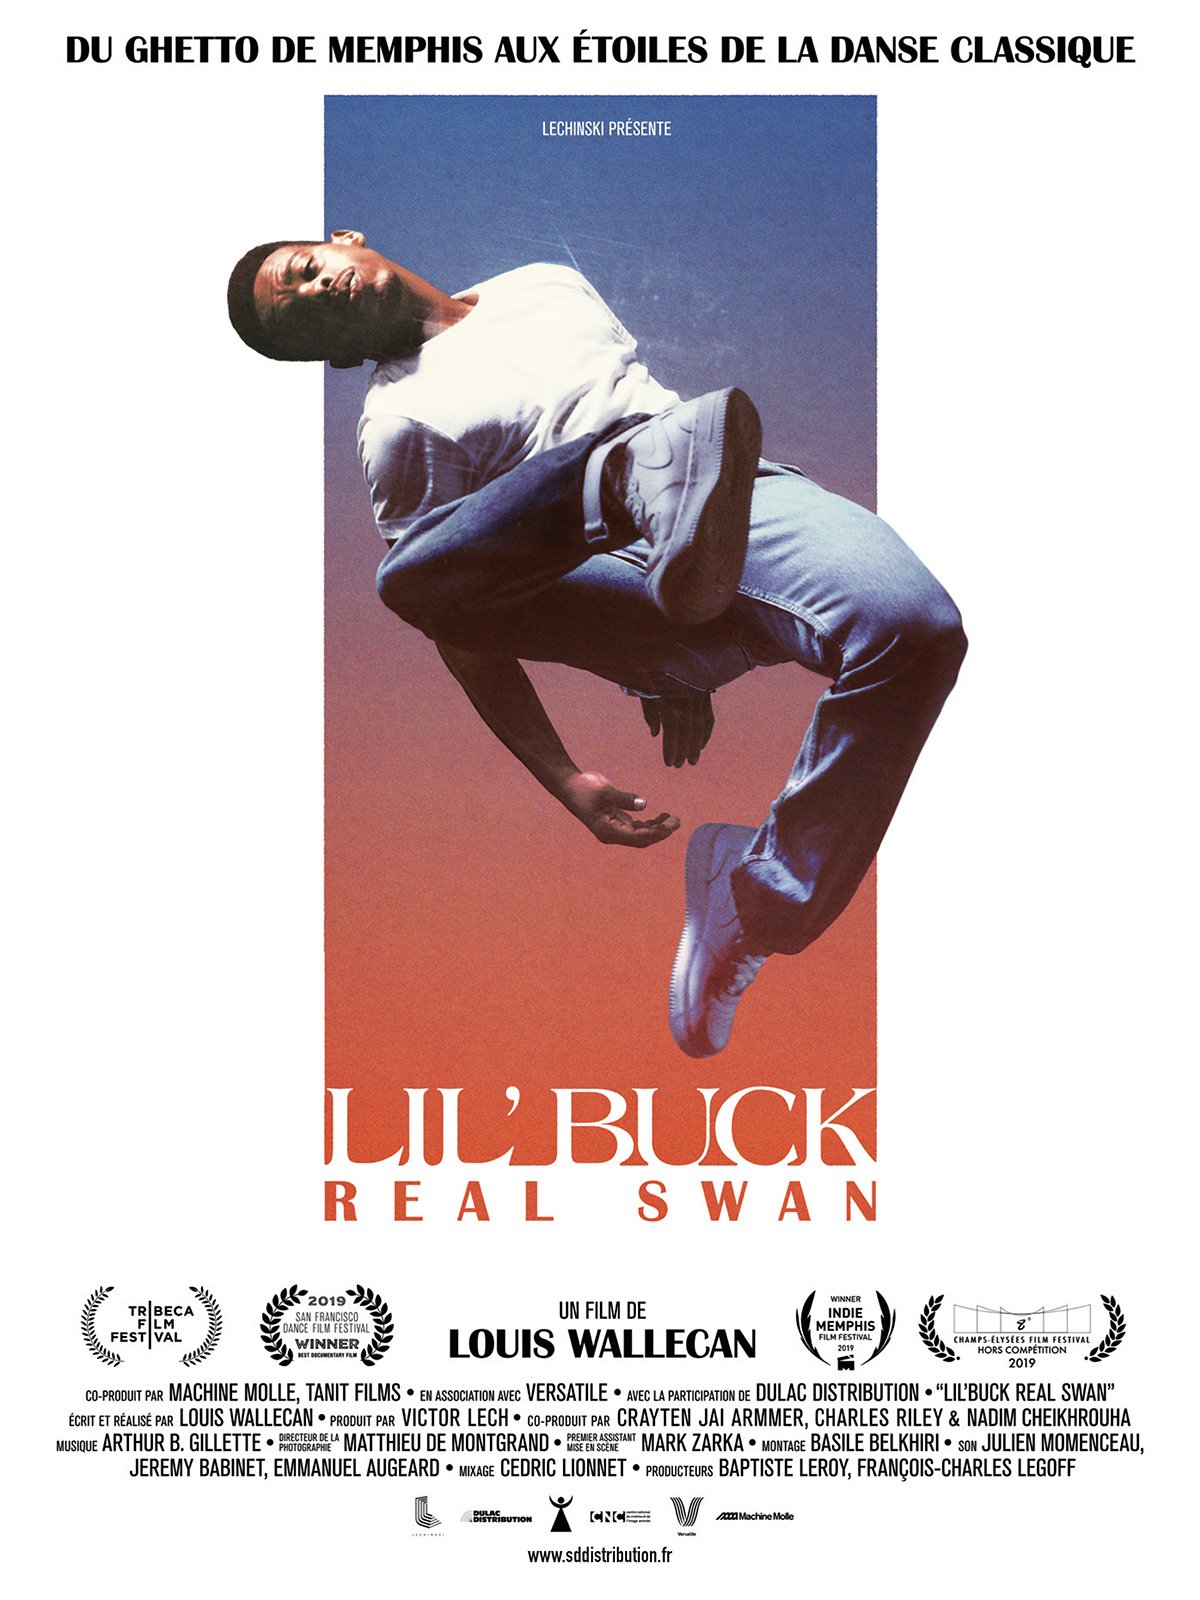 Lil' Buck: Real Swan : Affiche